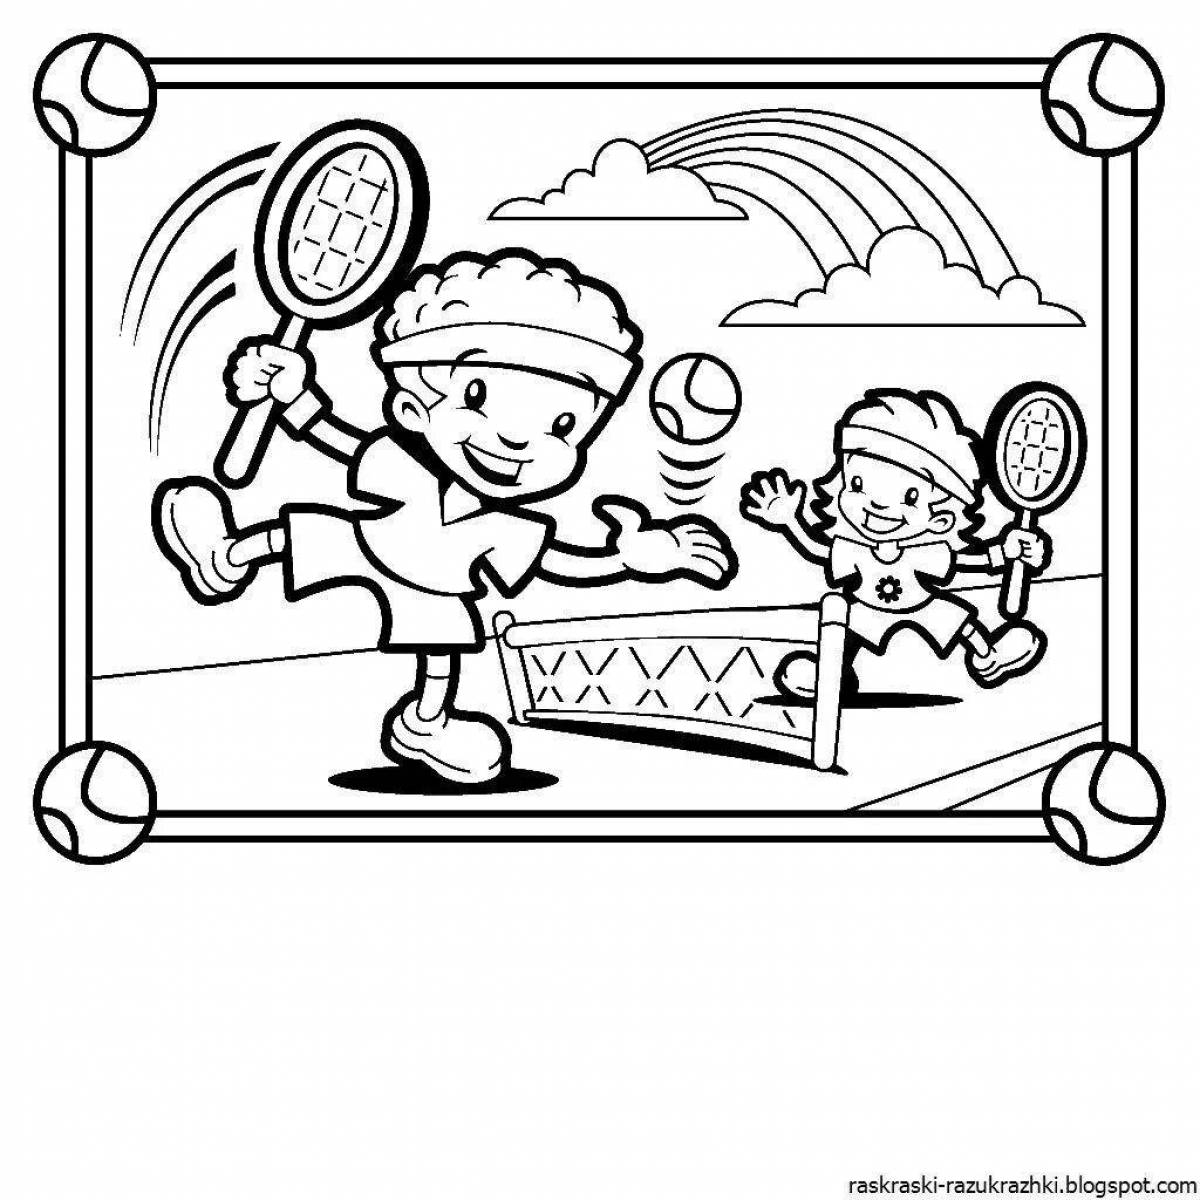 Crazy Sports Games Coloring Page